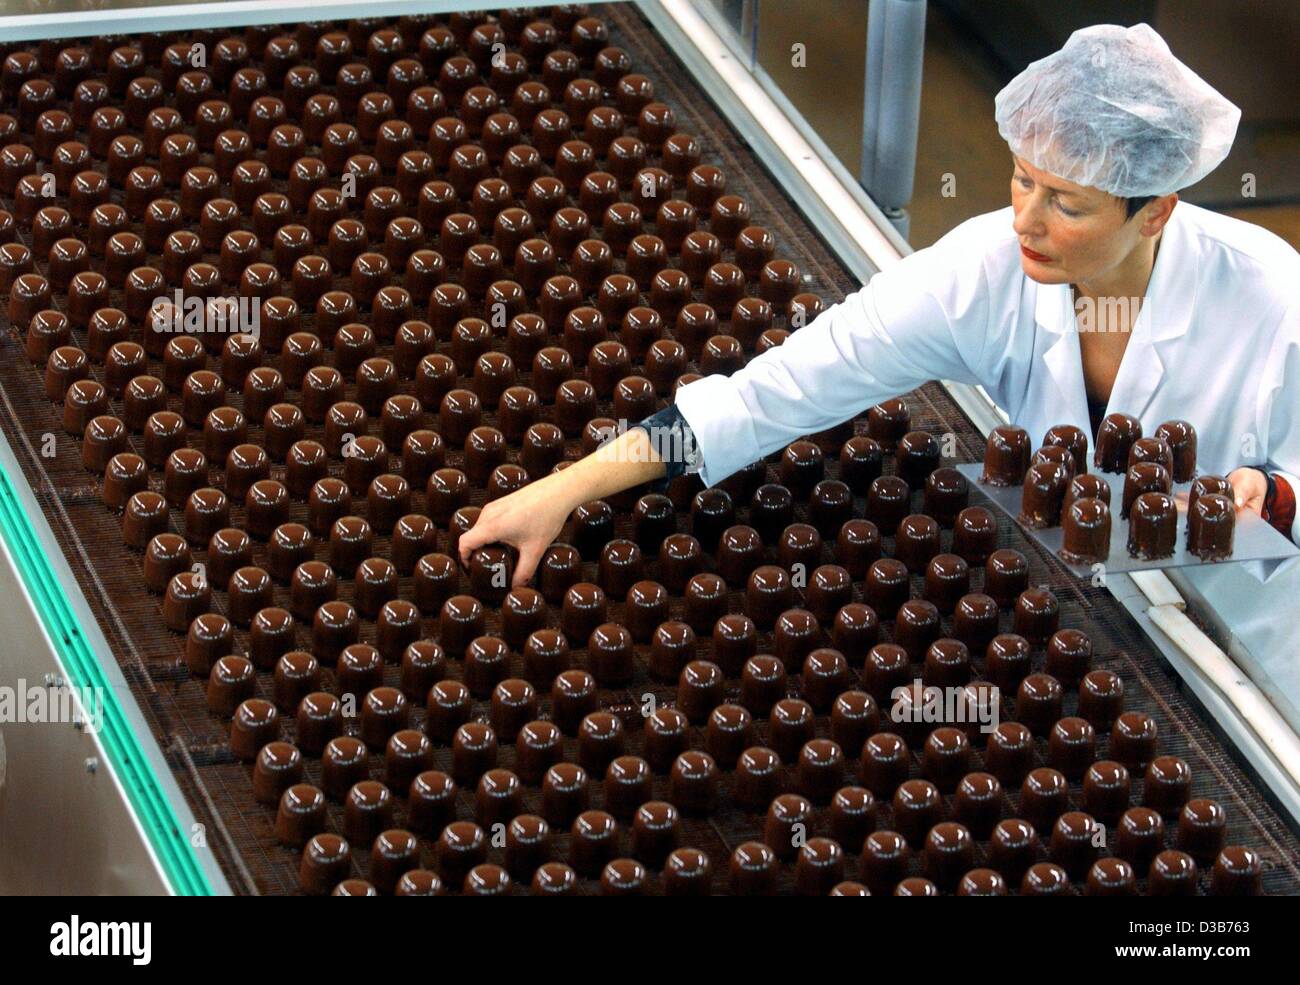 (dpa) - An employee checks the fabrication of 'chocolate kisses', a kind of chocolate marshmallows, at a production line of the sweets factory Grabower Suesswaren GmbH in Grabow, Germany, 26 November 2002. The company has an annual turnover of some 100 million Euro. Stock Photo